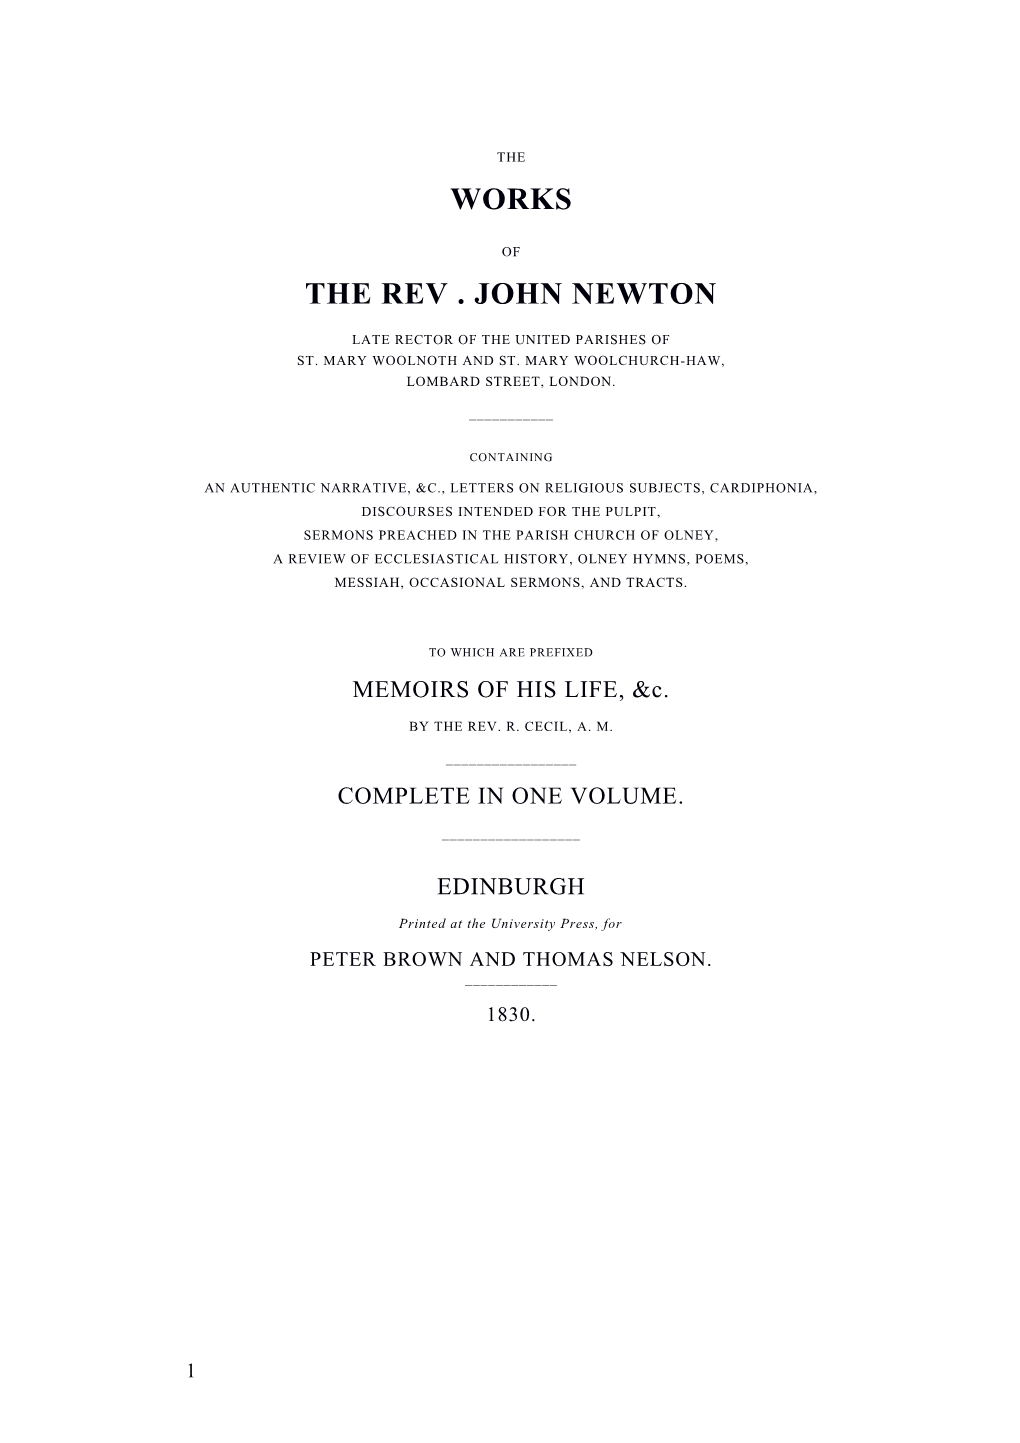 The Works of the Rev. John Newton to Which Are Prefixed, Memoirs of His Life